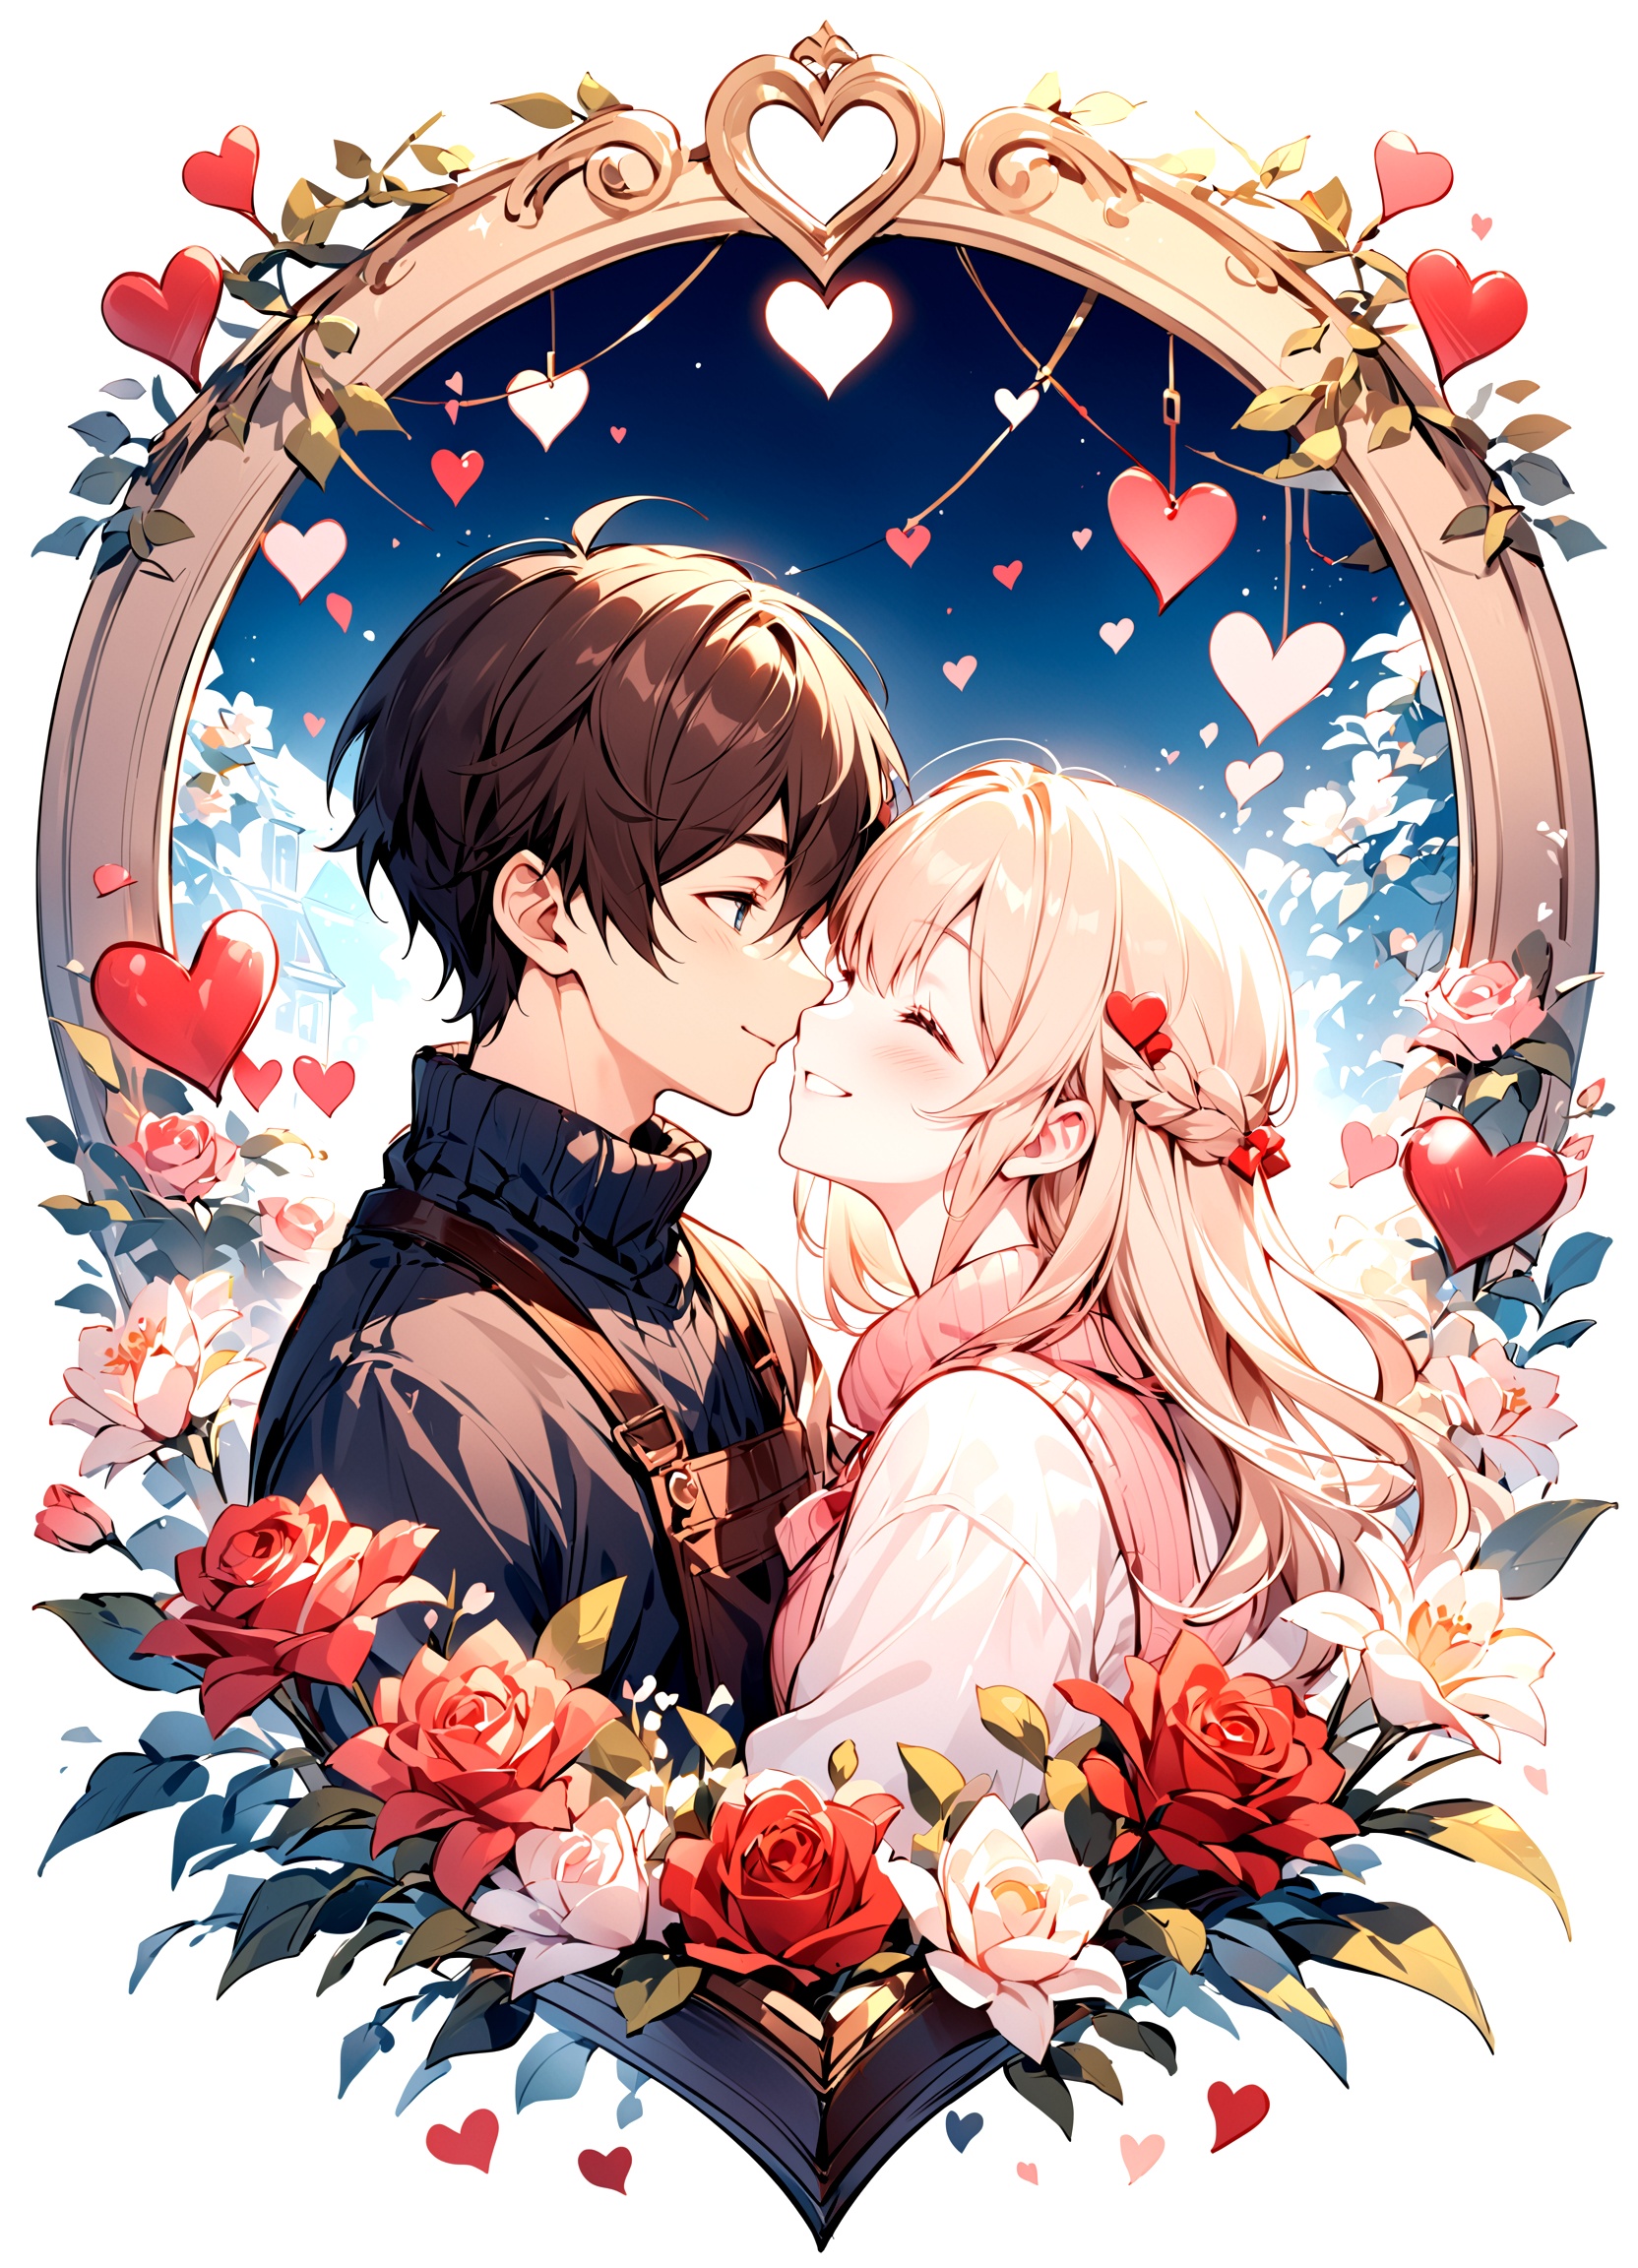 An illustration depicting a sweet Valentine's Day moment between a boy and a girl. The boy and girl are shown enjoying a romantic and memorable Valentine's Day together. They are portrayed in a charming and heartwarming style, with smiles on their faces and a joyful aura surrounding them. The scene is filled with symbols of love and affection, such as hearts, flowers, and chocolates. The color palette chosen for this image is soft and warm, reflecting the tender emotions of the couple. The overall result is a delightful portrayal of a boy and girl celebrating a sweet Valentine's Day, beautifully rendered in a style that captures the essence of love and happiness.